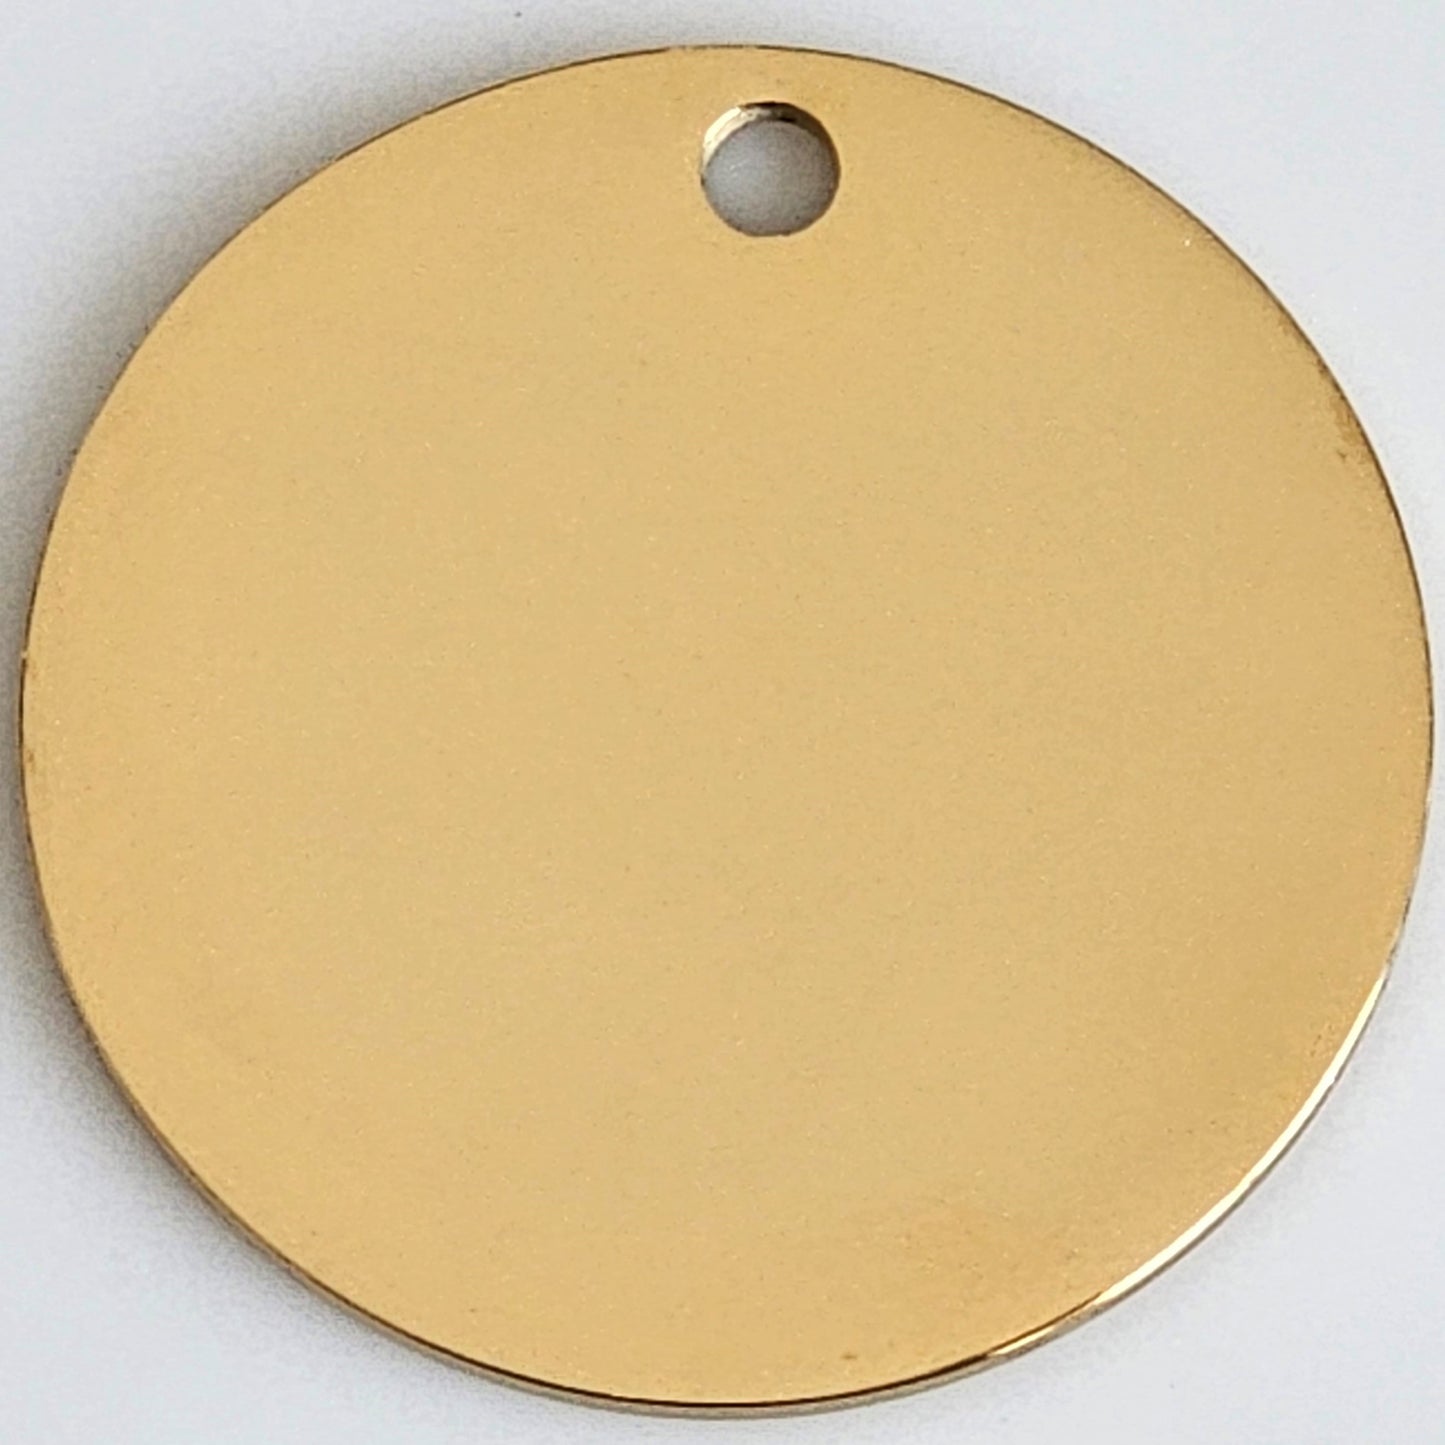 Gold Plated Stainless Steel - 1 1/4" Circle (with hole)